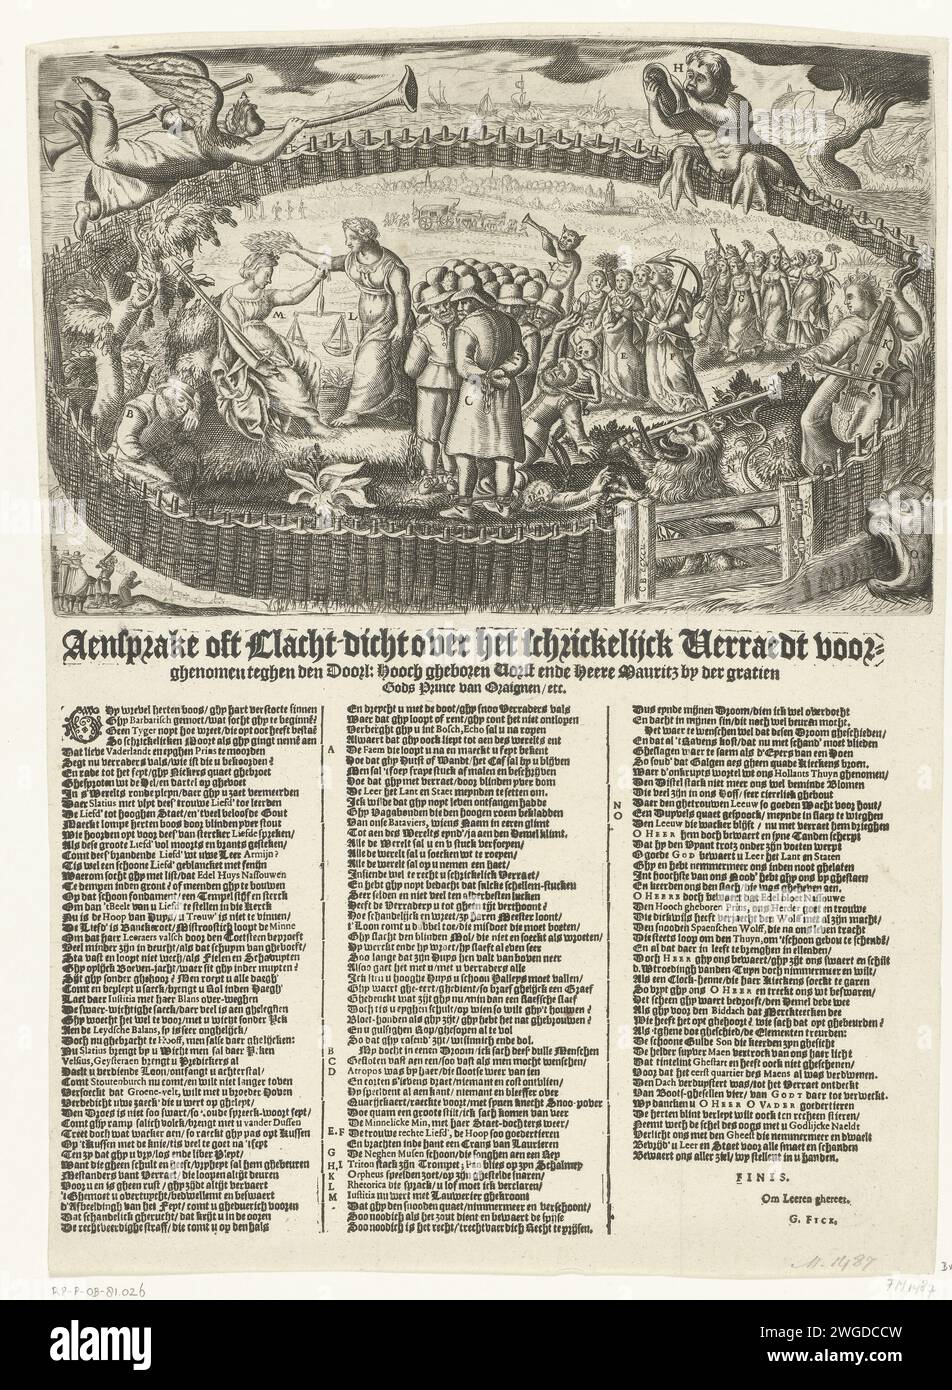 Allegory on the capture of the conspirators against Maurits, 1623, 1623 print Allegory on the capture of the conspirators against Maurits, 1623. In the Dutch garden there are the captured conspirators. On the left, Rhetorica crowns justice, on the right a parade of love and hope followed by nine muses. Orpheus plays on a cello, the Hollandse Leeuw is waiting at the gate. In the air the fame, from the water, triton blows on his horn. Printed under the plate 3 columns text in Dutch. print maker: Northern Netherlandspublisher: Amsterdam paper engraving / letterpress printing (revolutionary) plot, Stock Photo